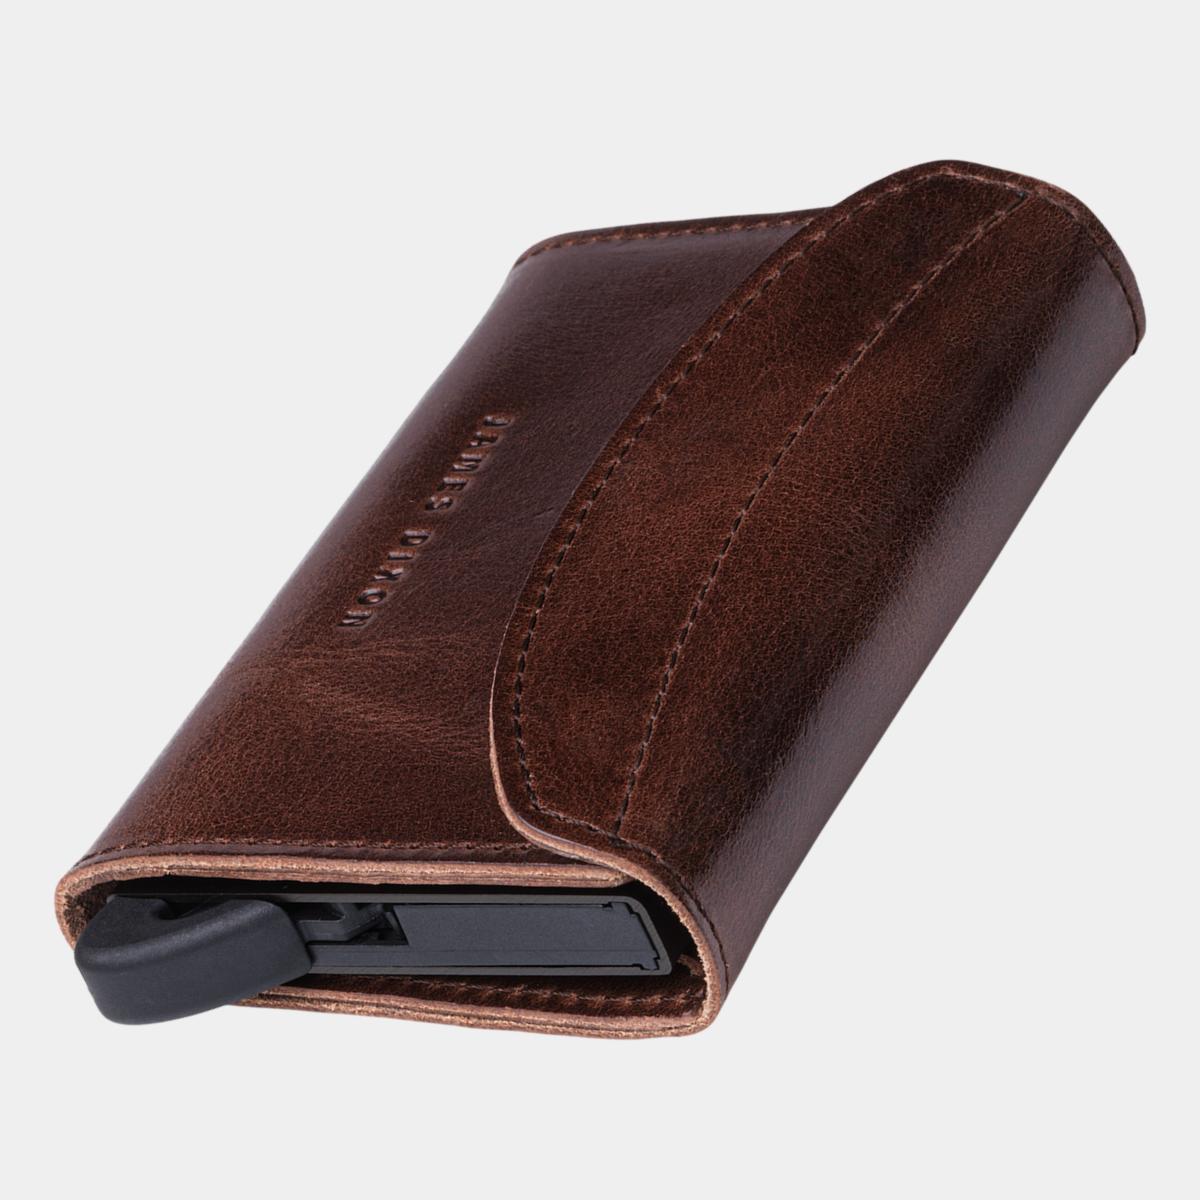 jd0104 james dixon grande classic cacao brown coin pocket wallet inclined